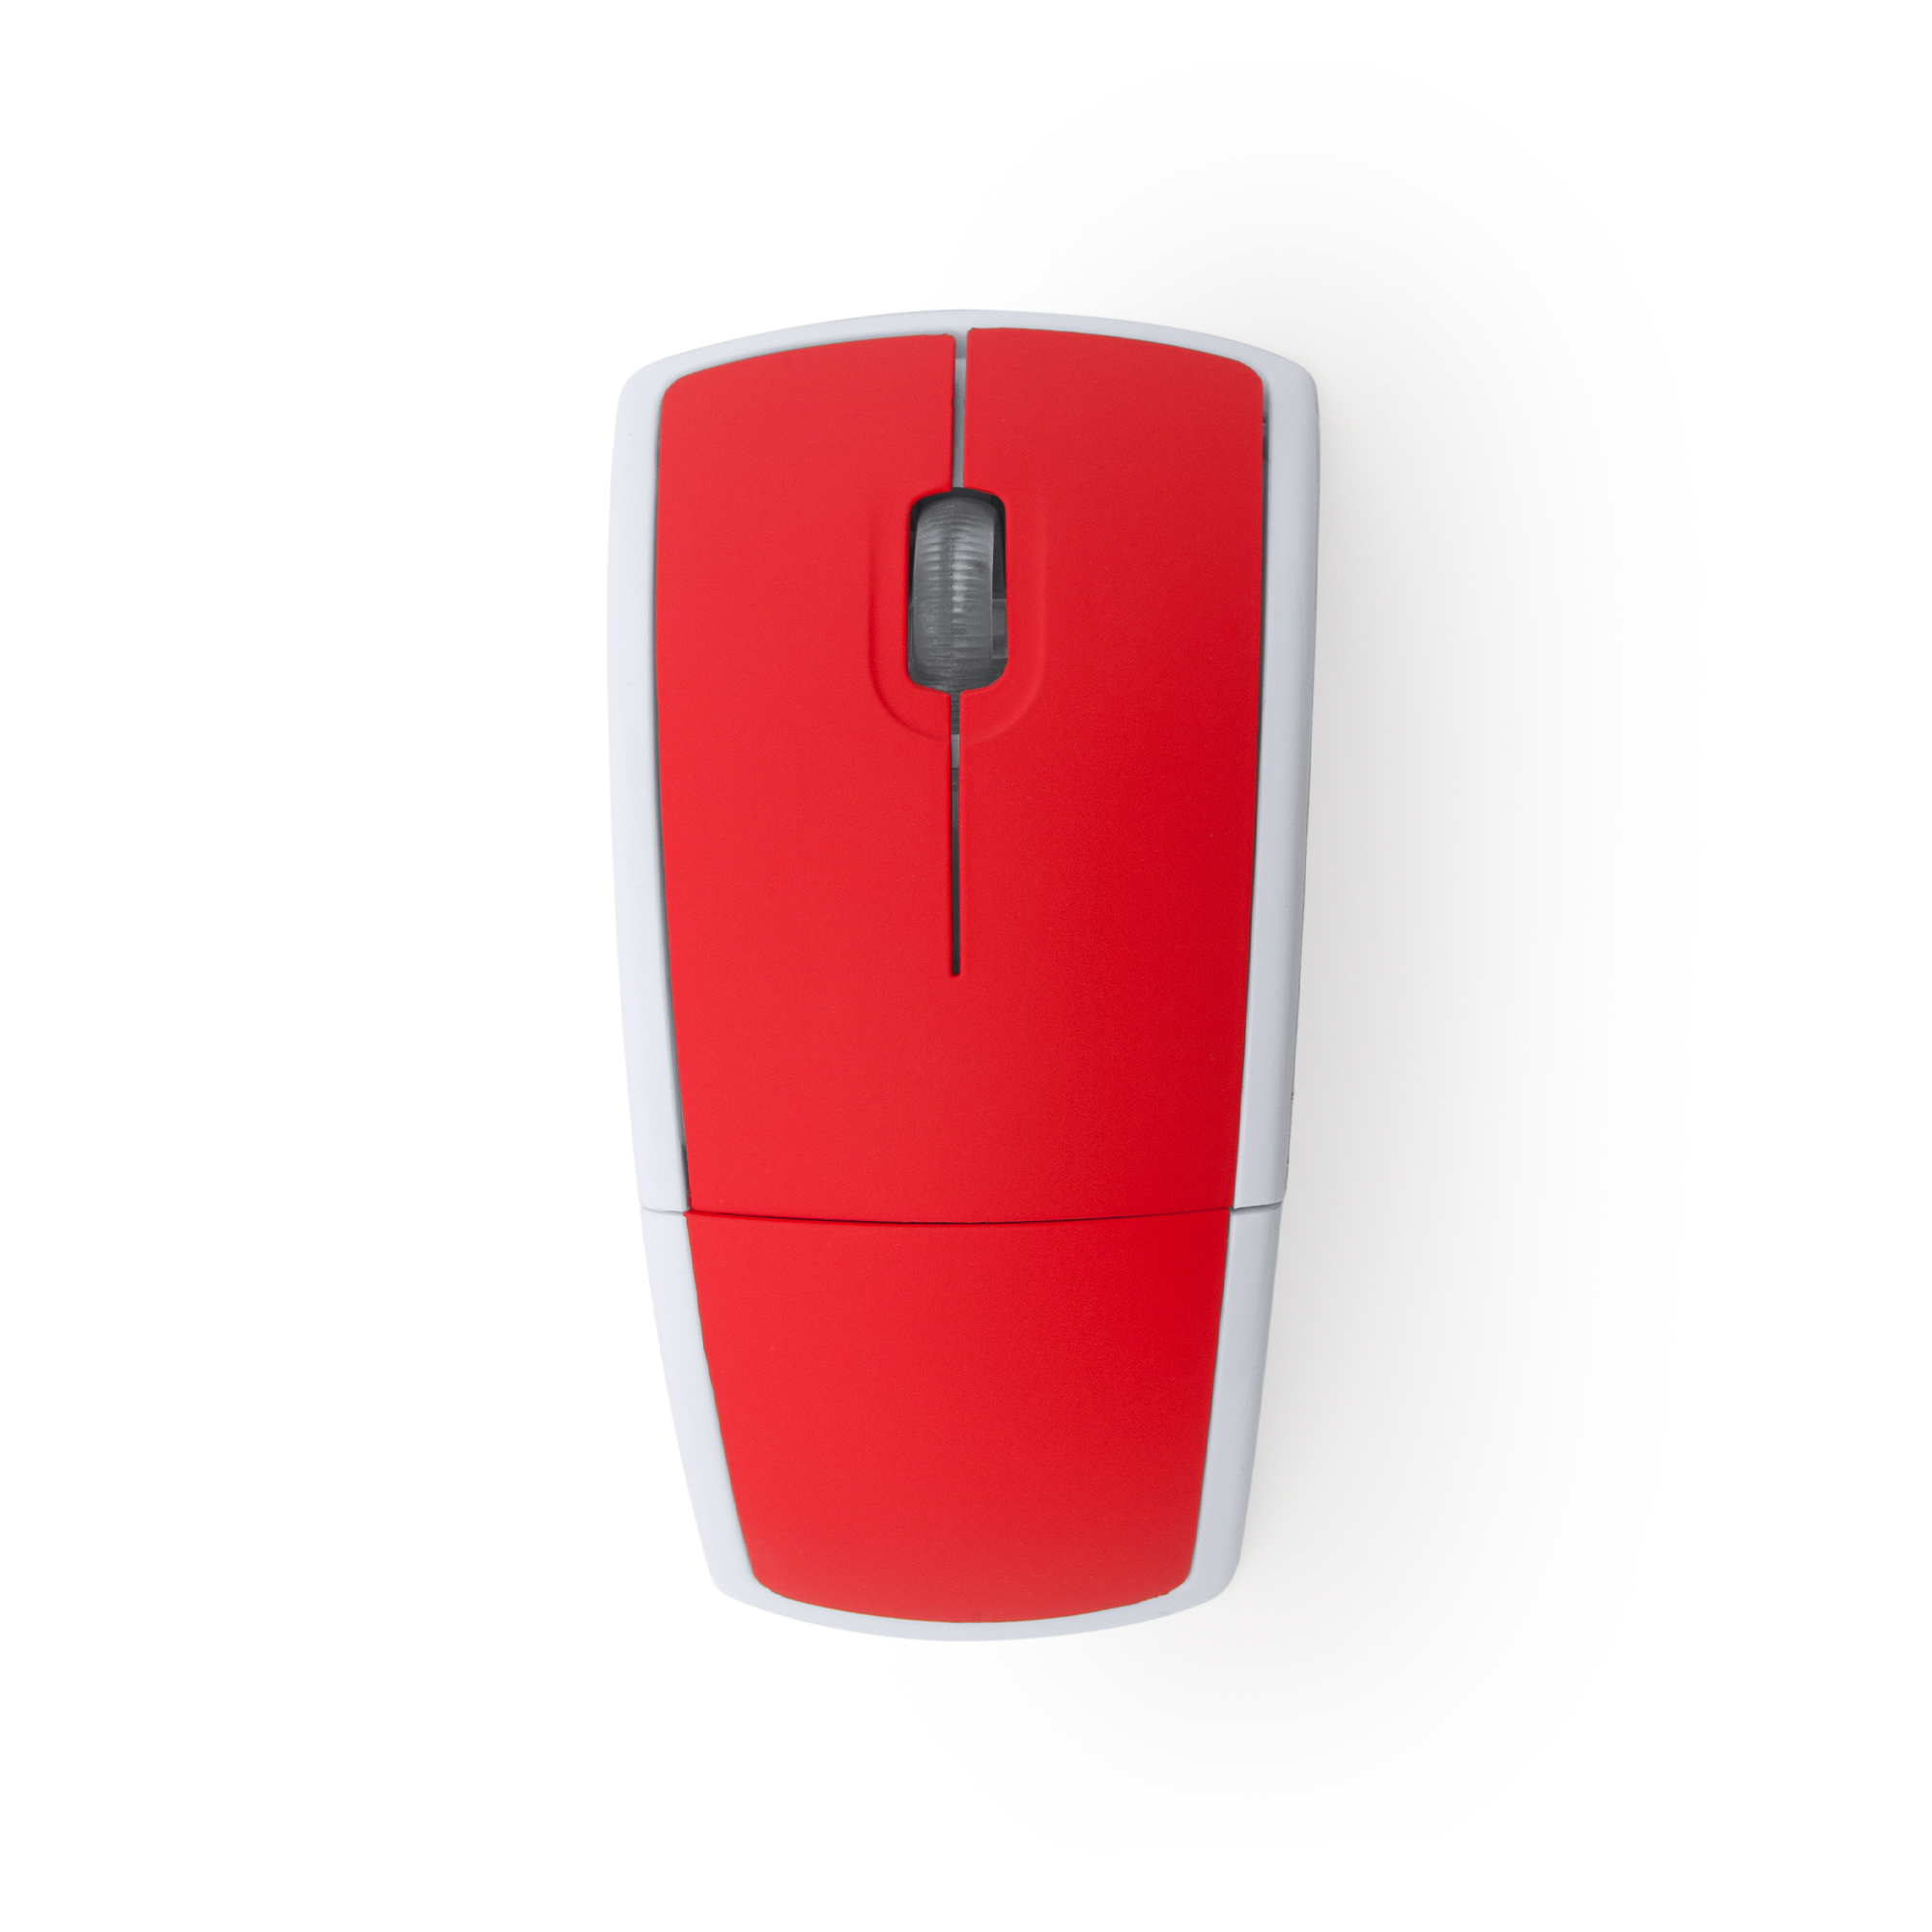 2579-grunge-mouse-wireless-rosso.jpg